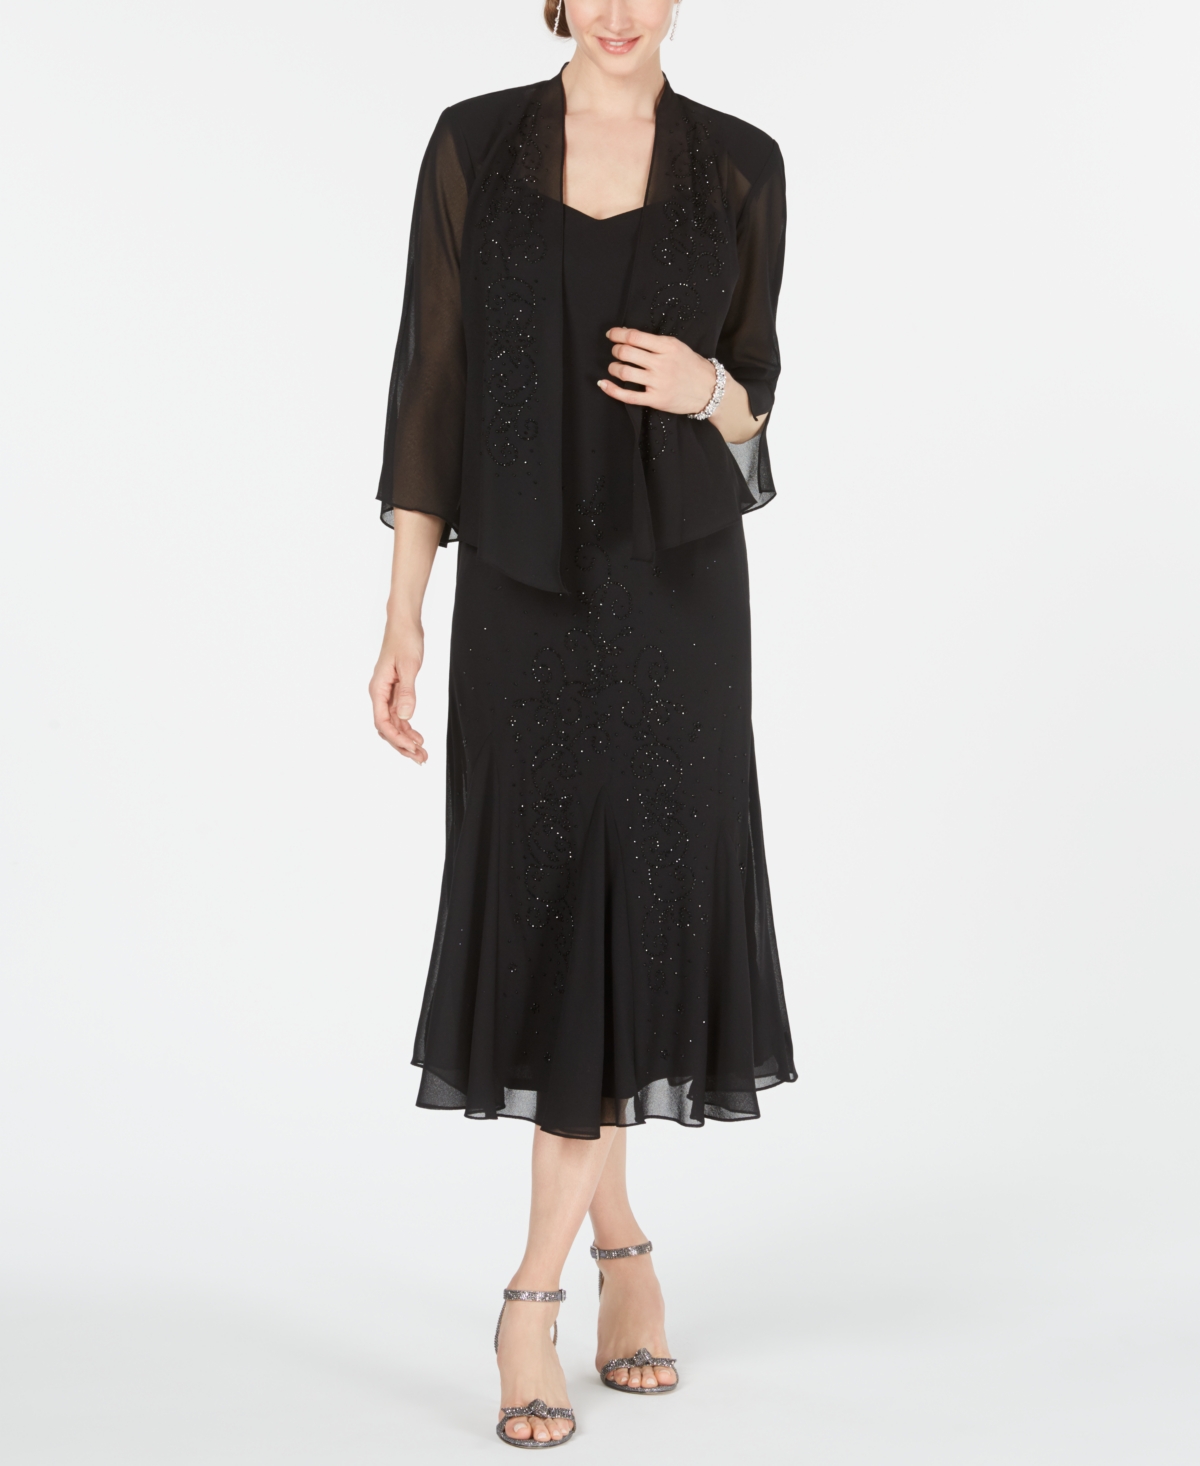 1920s Dress with Sleeves – Modest, Mature, Authentically Inspired 1920s Dresses RM Richards Sleeveless Beaded V-Neck Dress and Jacket - Black $129.00 AT vintagedancer.com